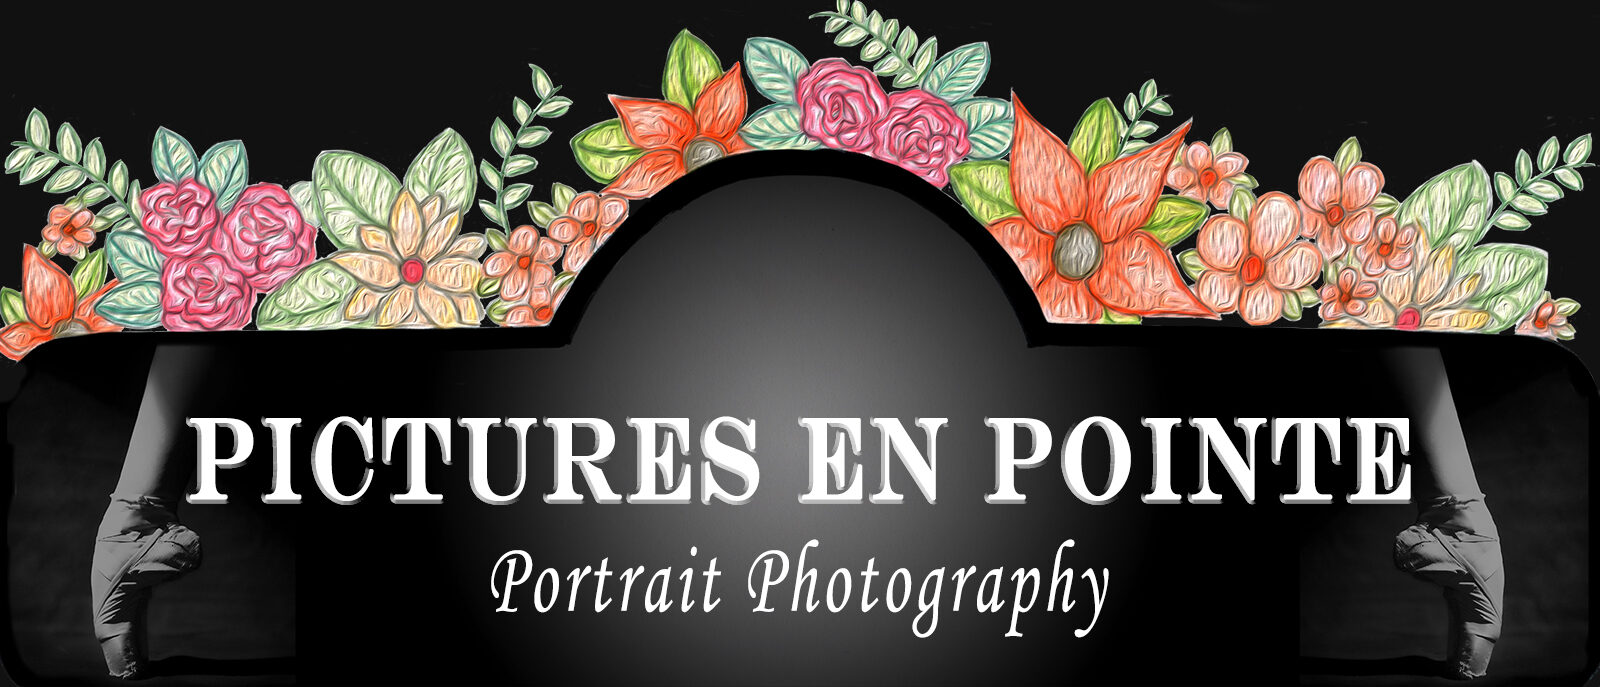 Pictures En Pointe Photography